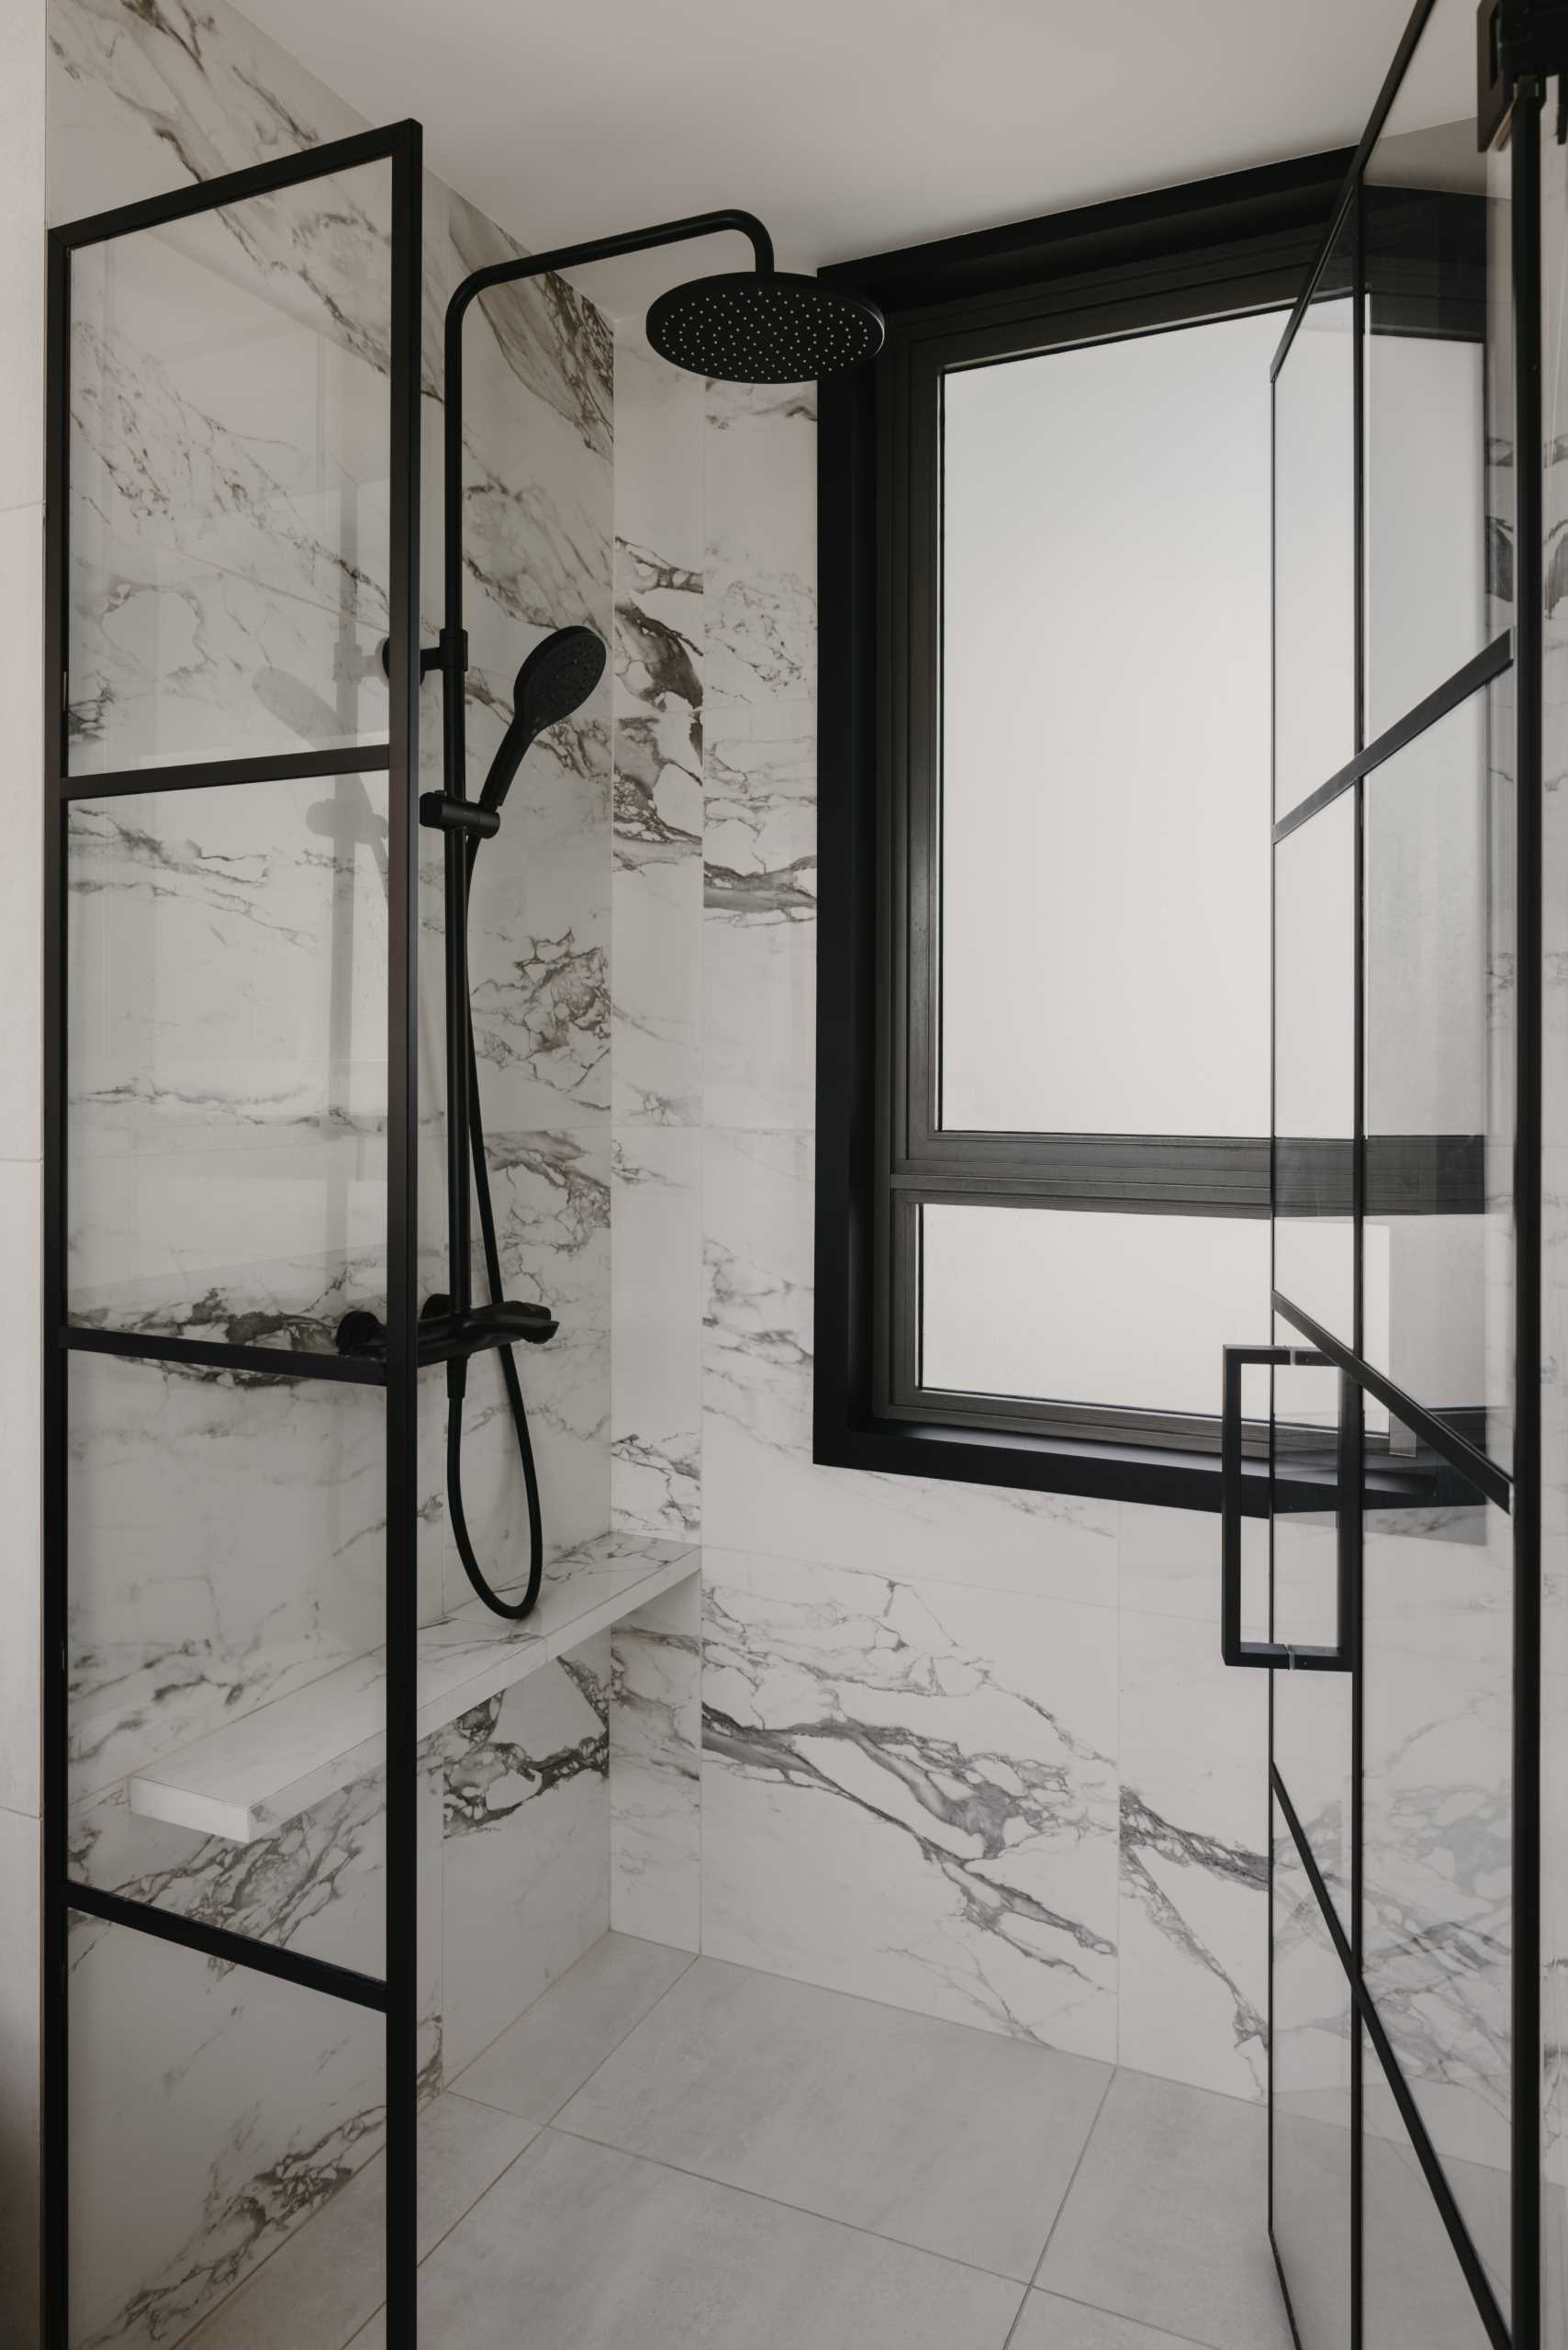 A modern bathroom with a monochrome theme, includes a black vanity, a stone countertop, and a shower with black accents.